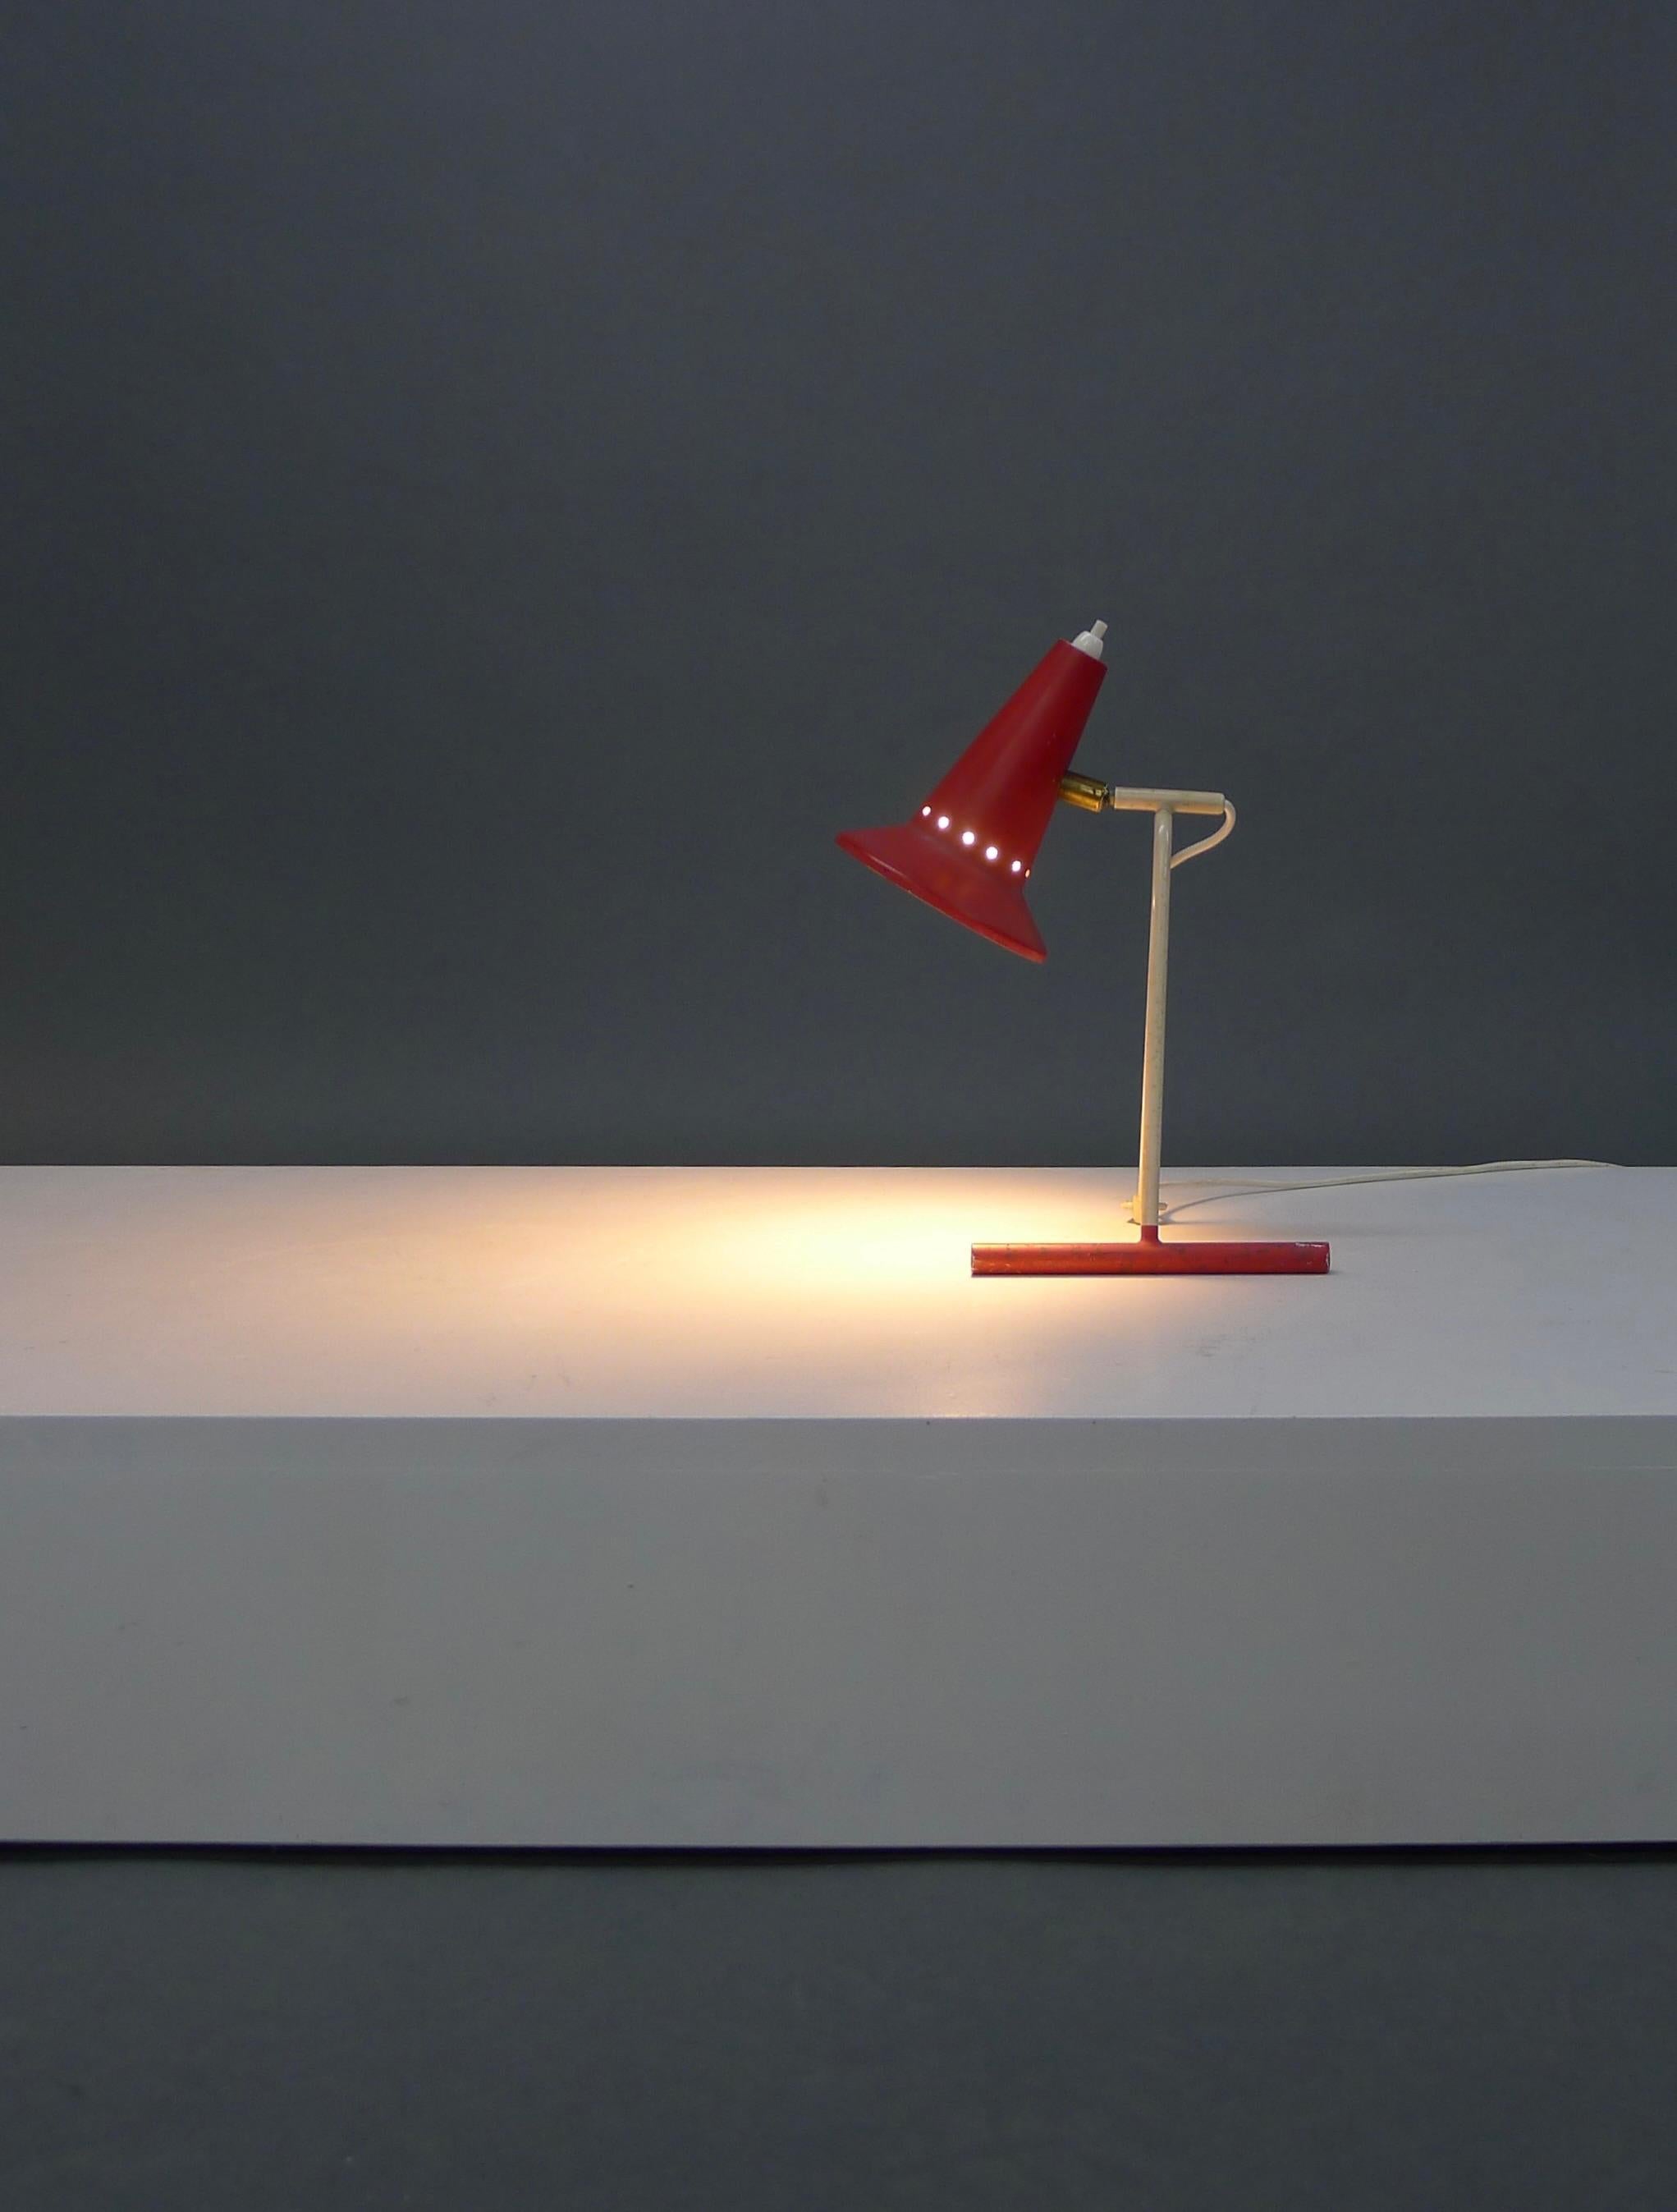 Stilux desk lamp, Italian 1950s

In lovely original condition, the red painted cone shaped metal shade has a band of perforations allowing light to shine through. The ball-jointed neck rotates the shade to where light is needed, and the plastic